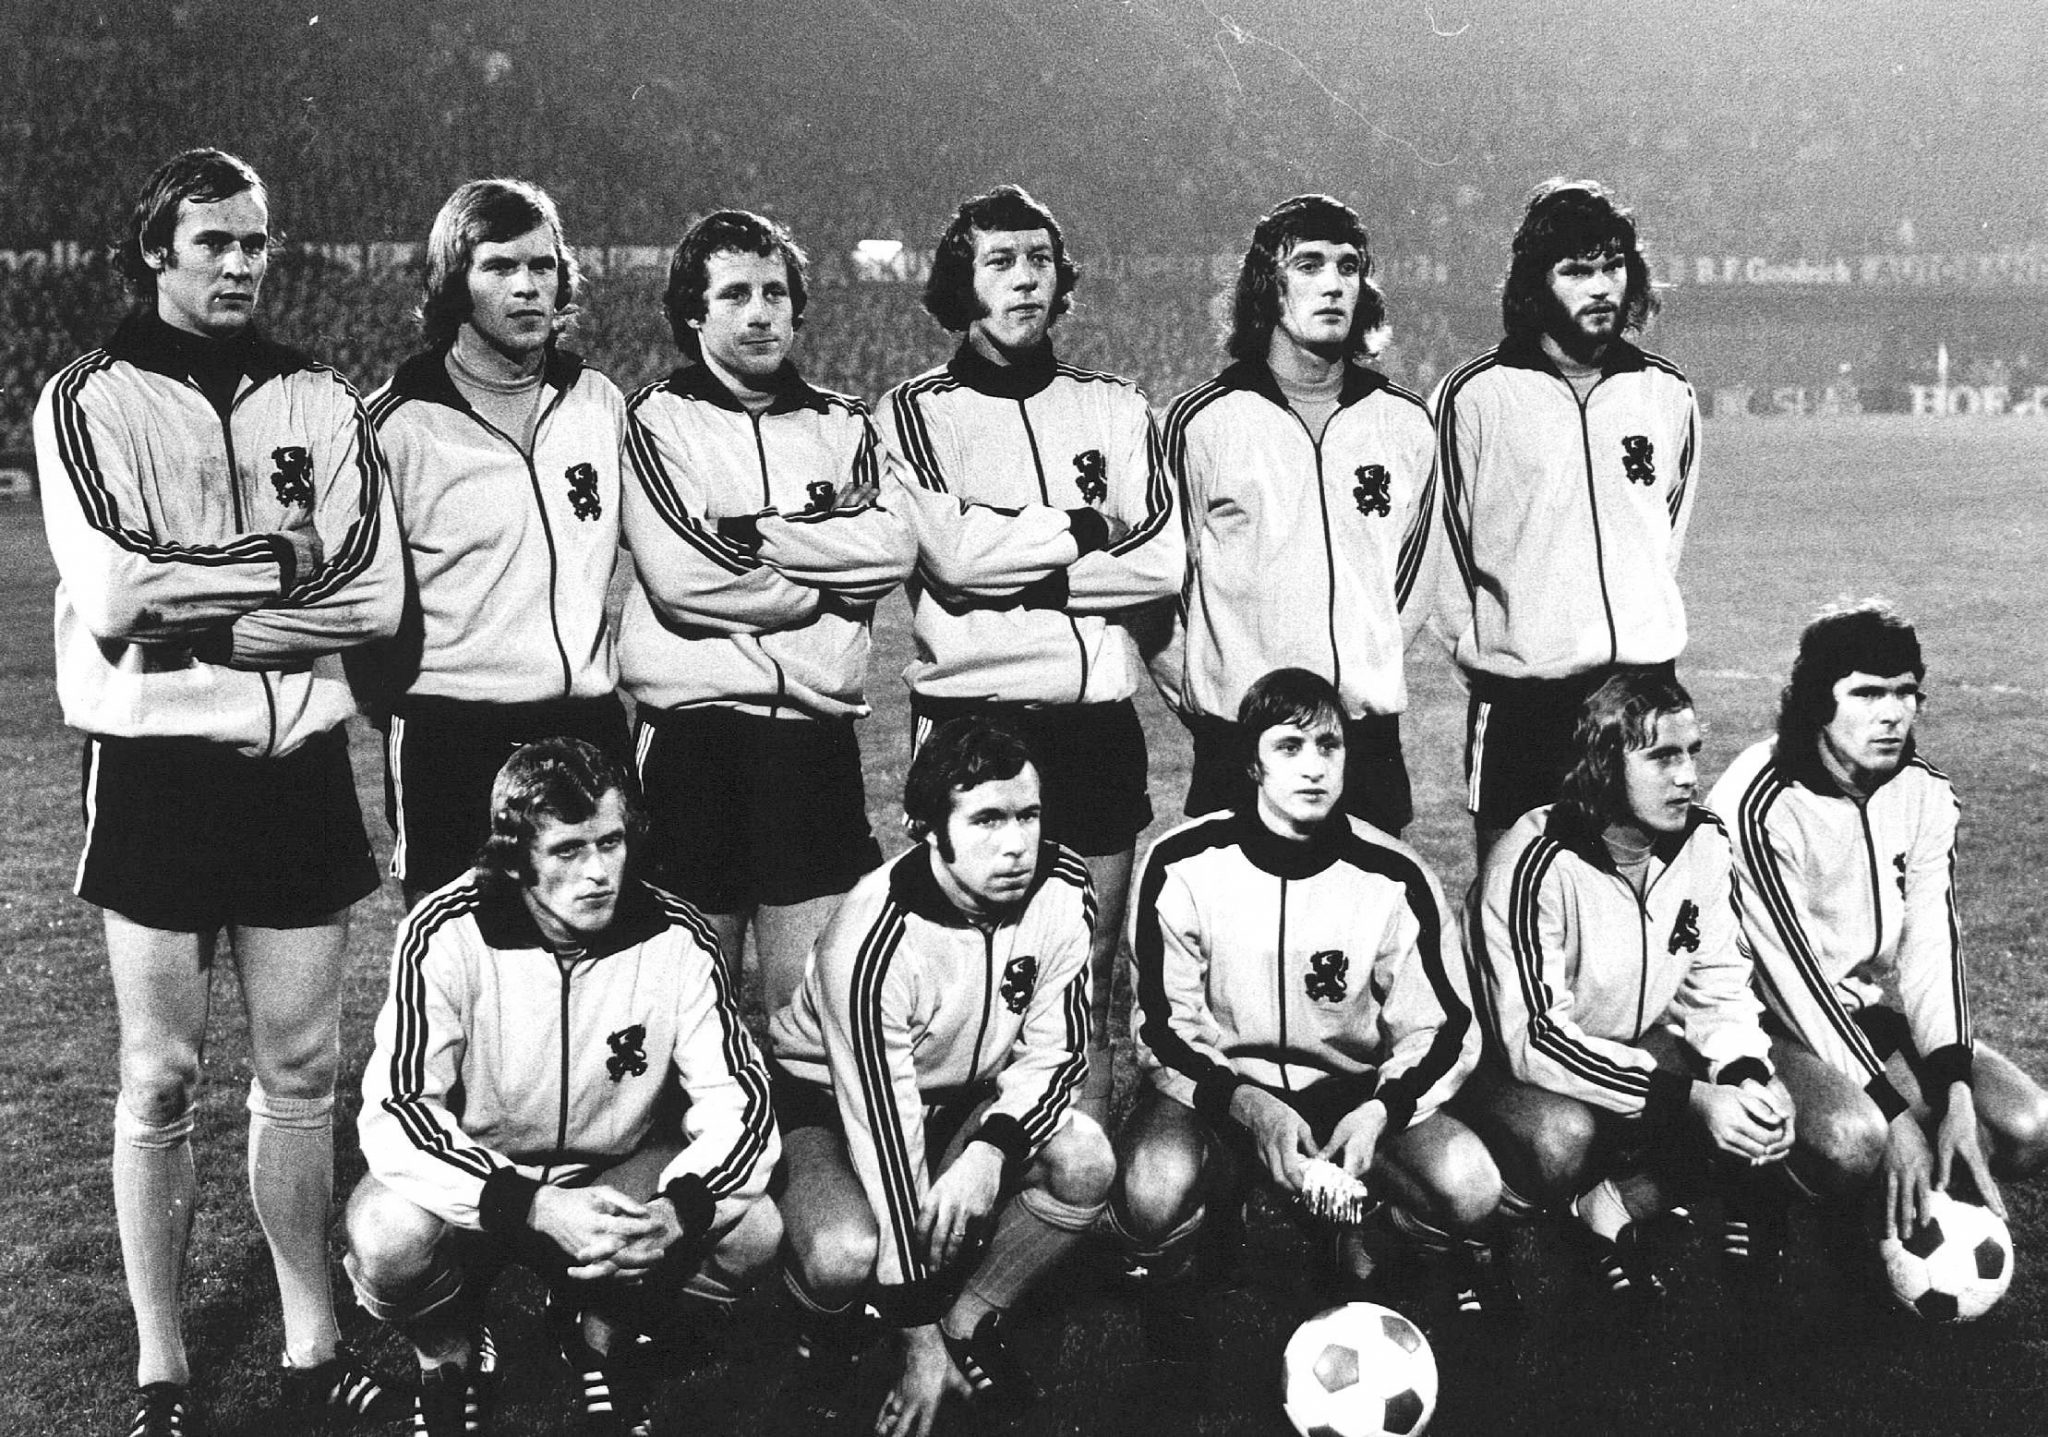 epa05228951 (FILE) A file picture dated 01 November 1972 of Dutch national soccer team players (top row, L-R) goalkeeper Jan van Beveren, Theo de Jong, Dick Schneider, Aad Mansveld, Ruud Krol and Barry Hulshoff; (front row, L-R) Piet Keizer, Theo Pahlplatz, Johan Cruyff, Johan Neeskens and Wim van Hanegem before the FIFA 1974 World Cup qualifying soccer match against Norway in Rotterdam, Netherlands. Dutch soccer legend Johan Cruyff died of cancer at the age of 68, his official website announced on 24 March 2016.  EPA/STAFF B/W ONLY